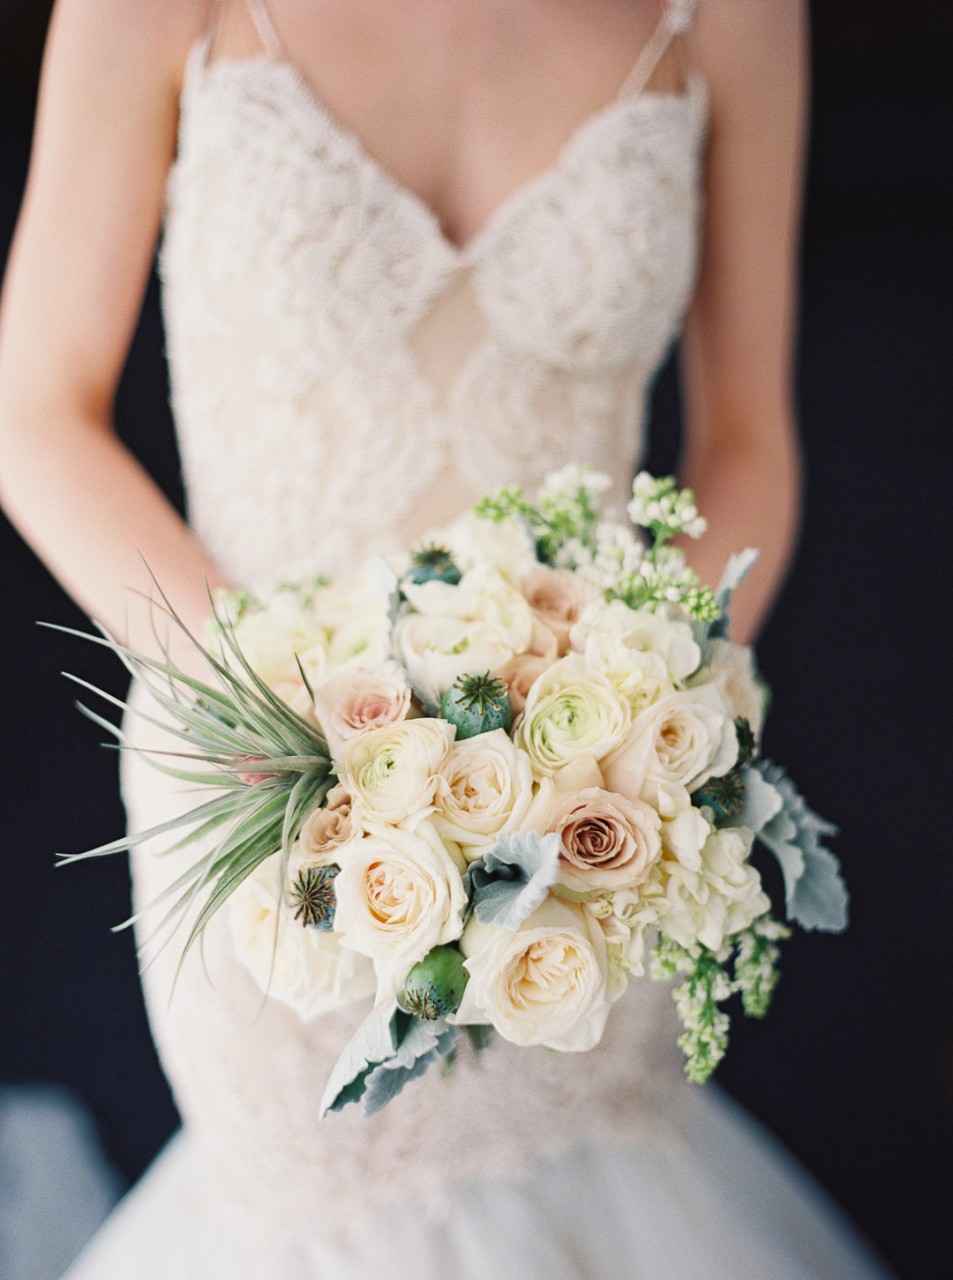 View More: http://melissakruse.pass.us/bubbly-bride-styled-shoot